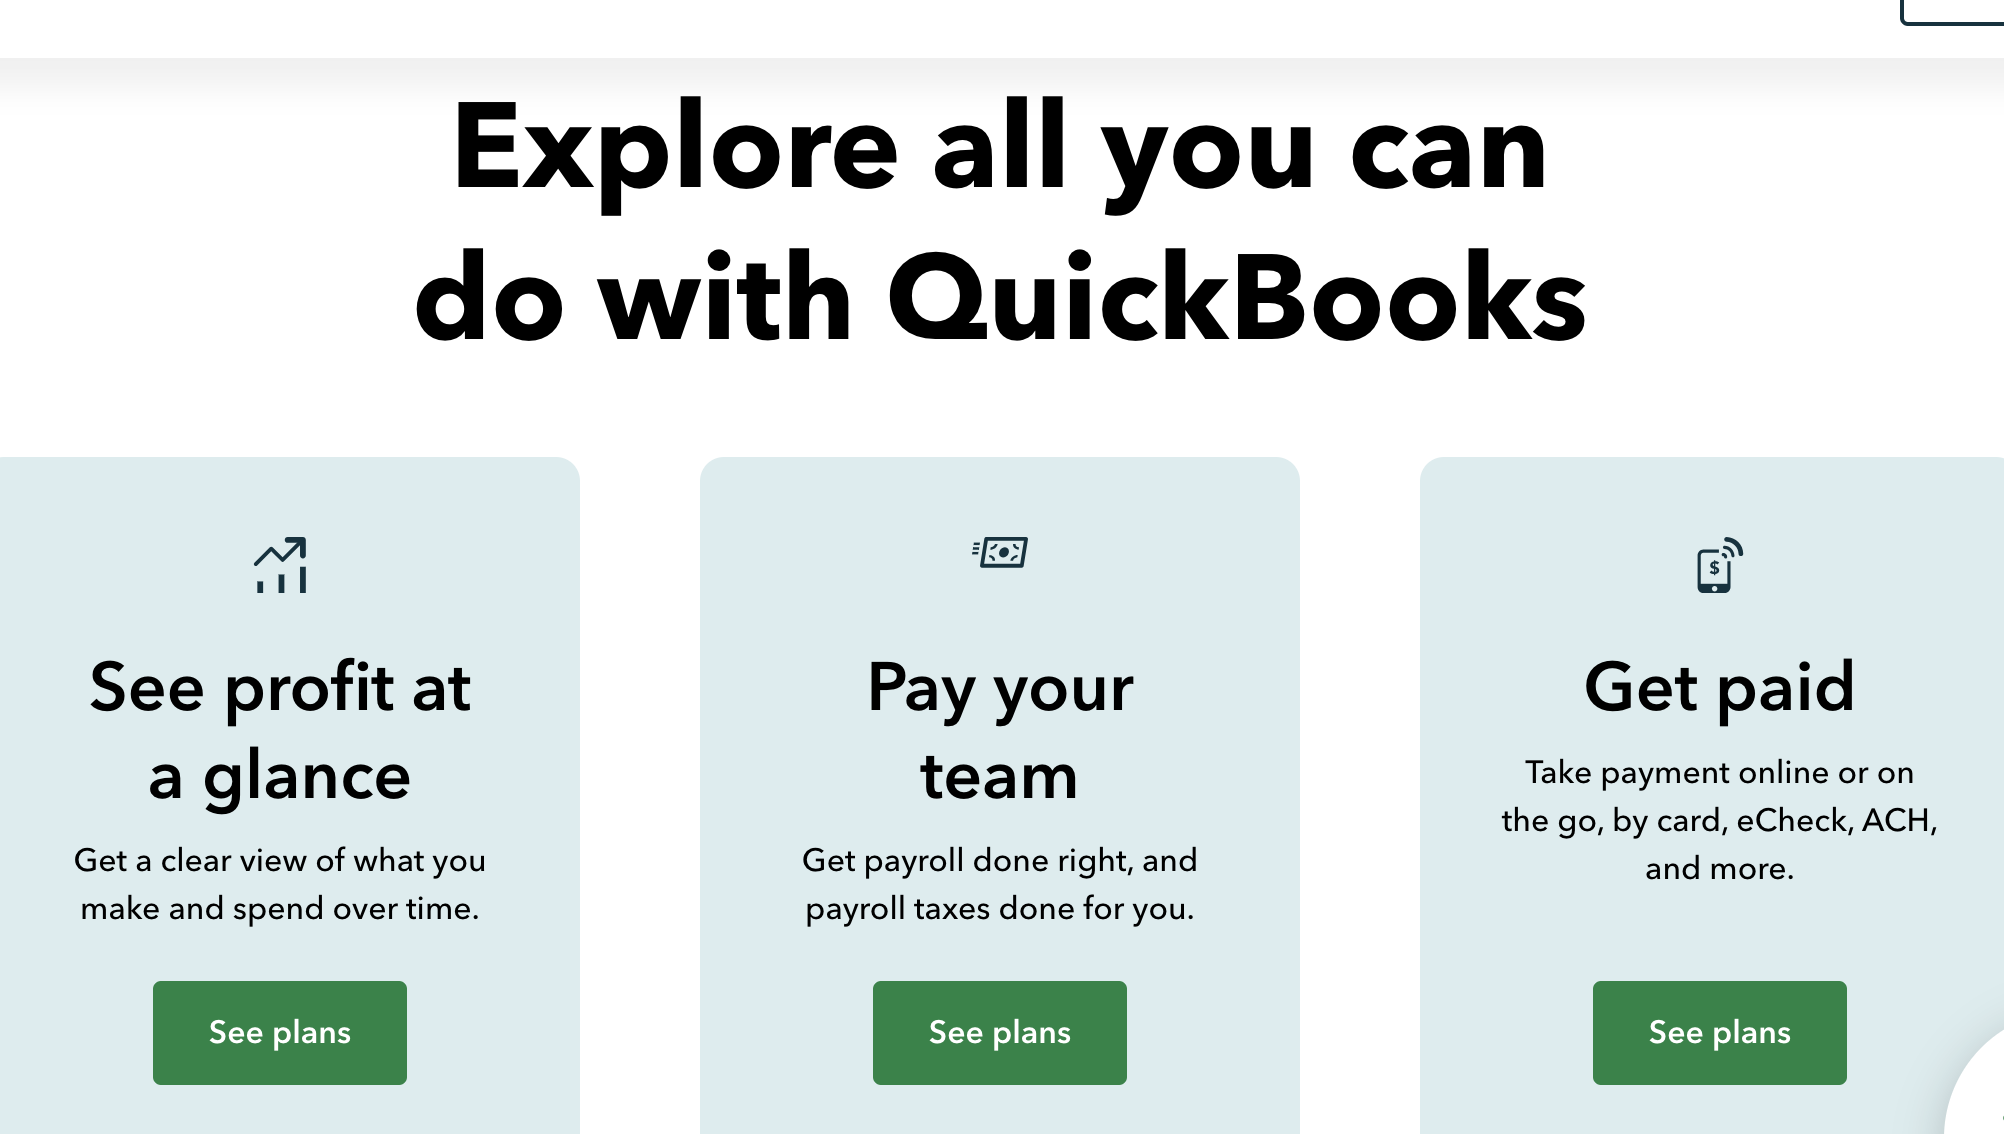 QuickBooks Enterprise: Is it Right for Your Small Business?